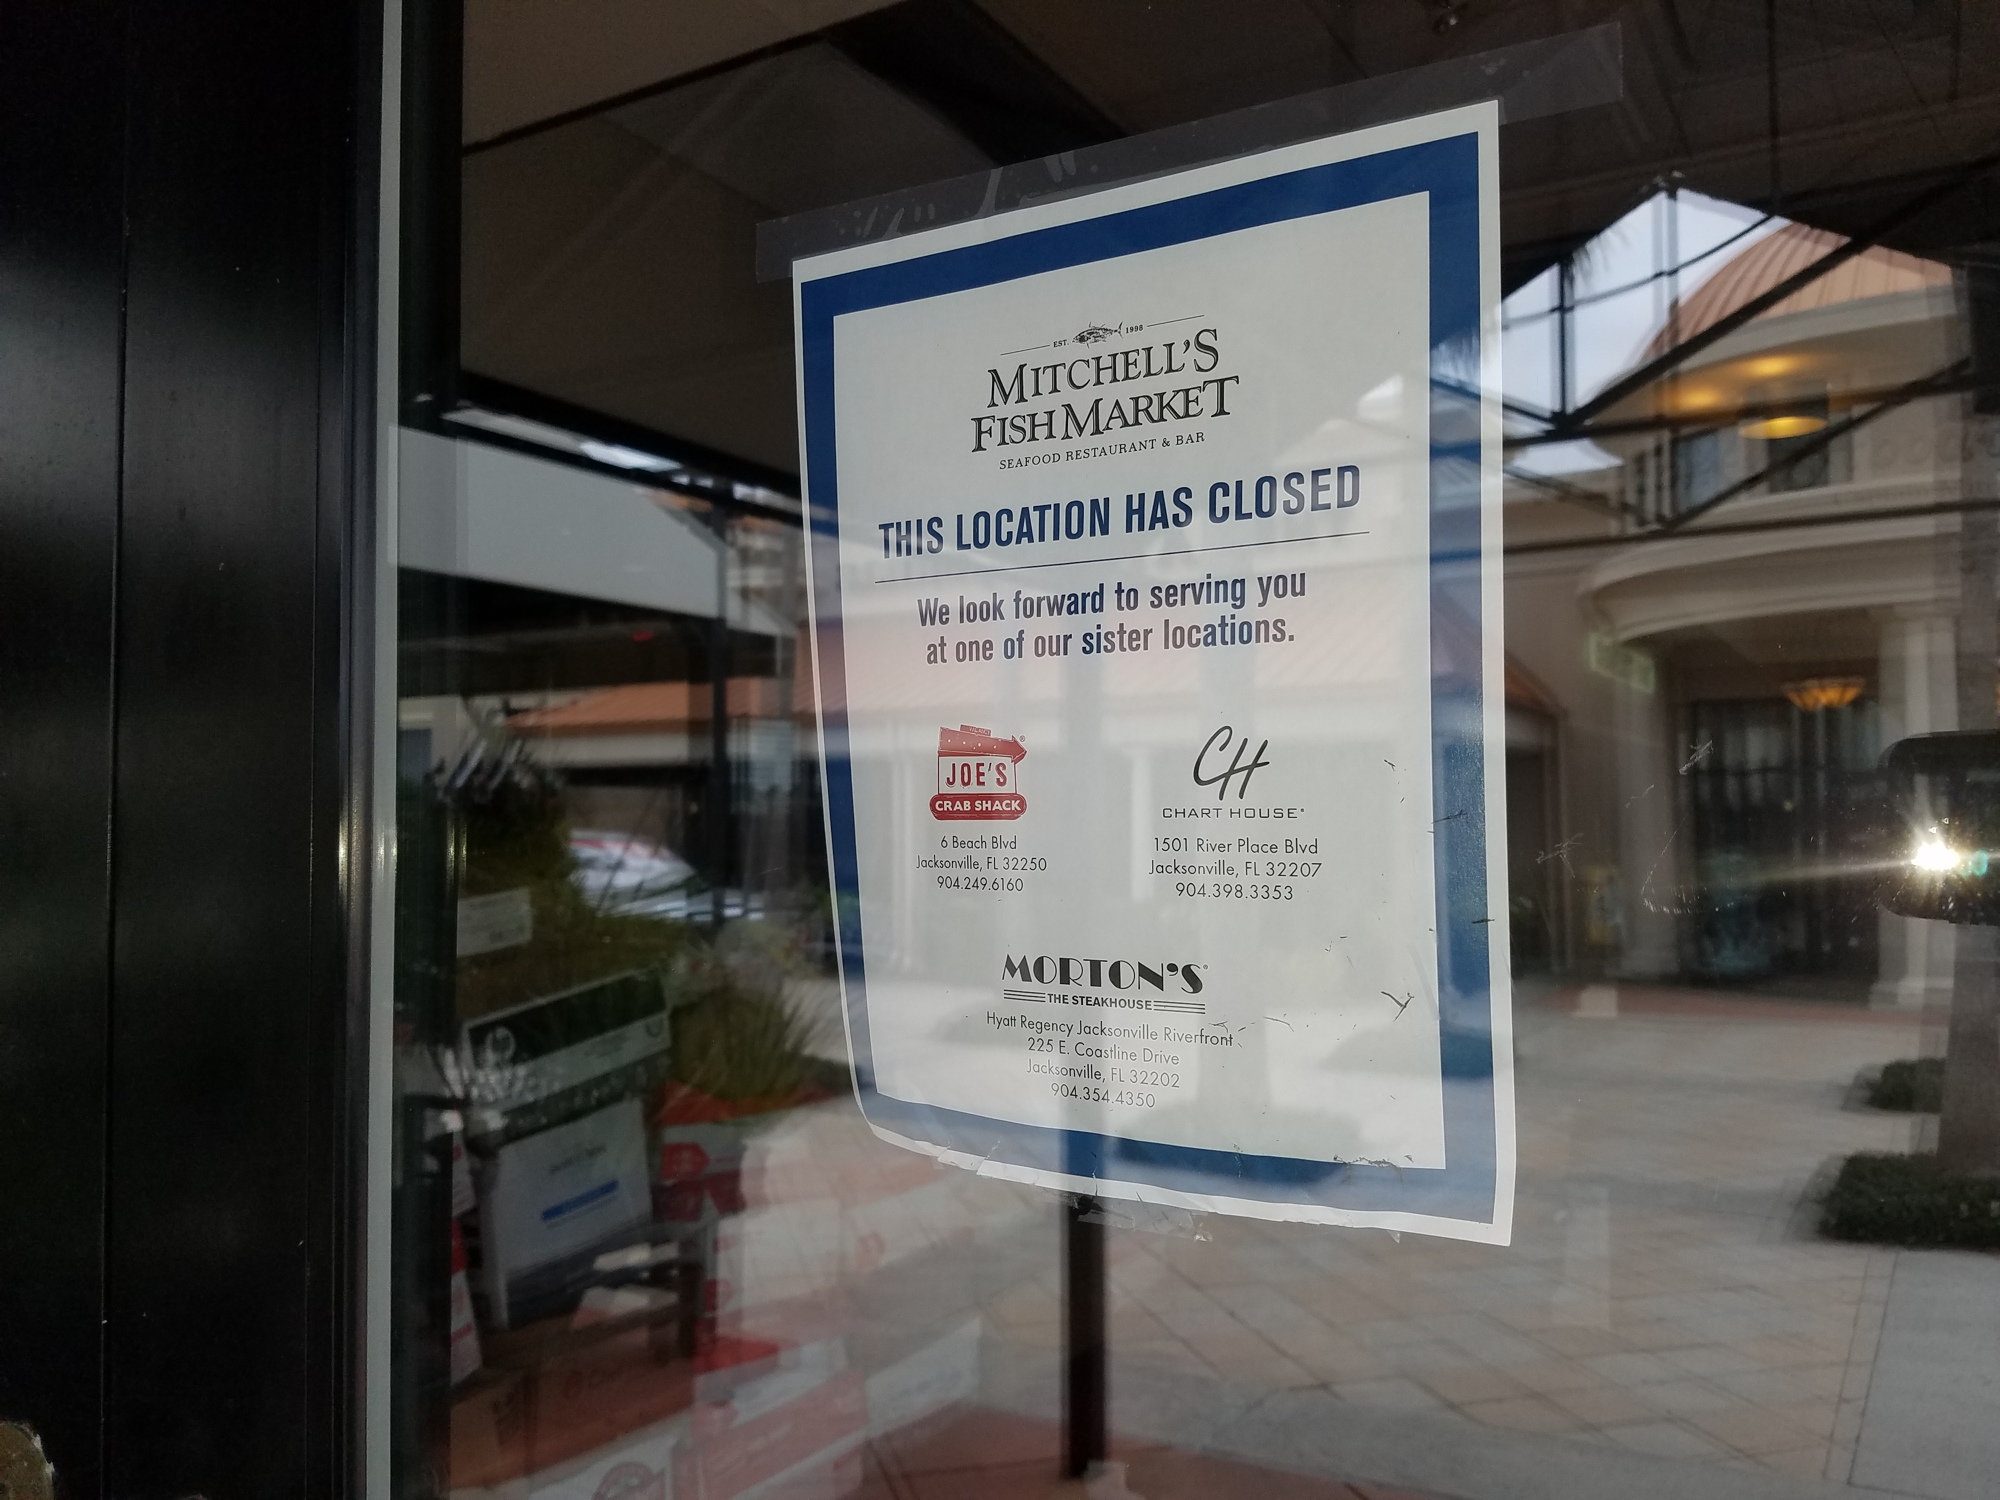 A sign on the door of Mitchell’s Fish Market directs customers to Landry’s other restaurants in town: Joe’s Crab Shack, Chart House and Morton’s The Steakhouse